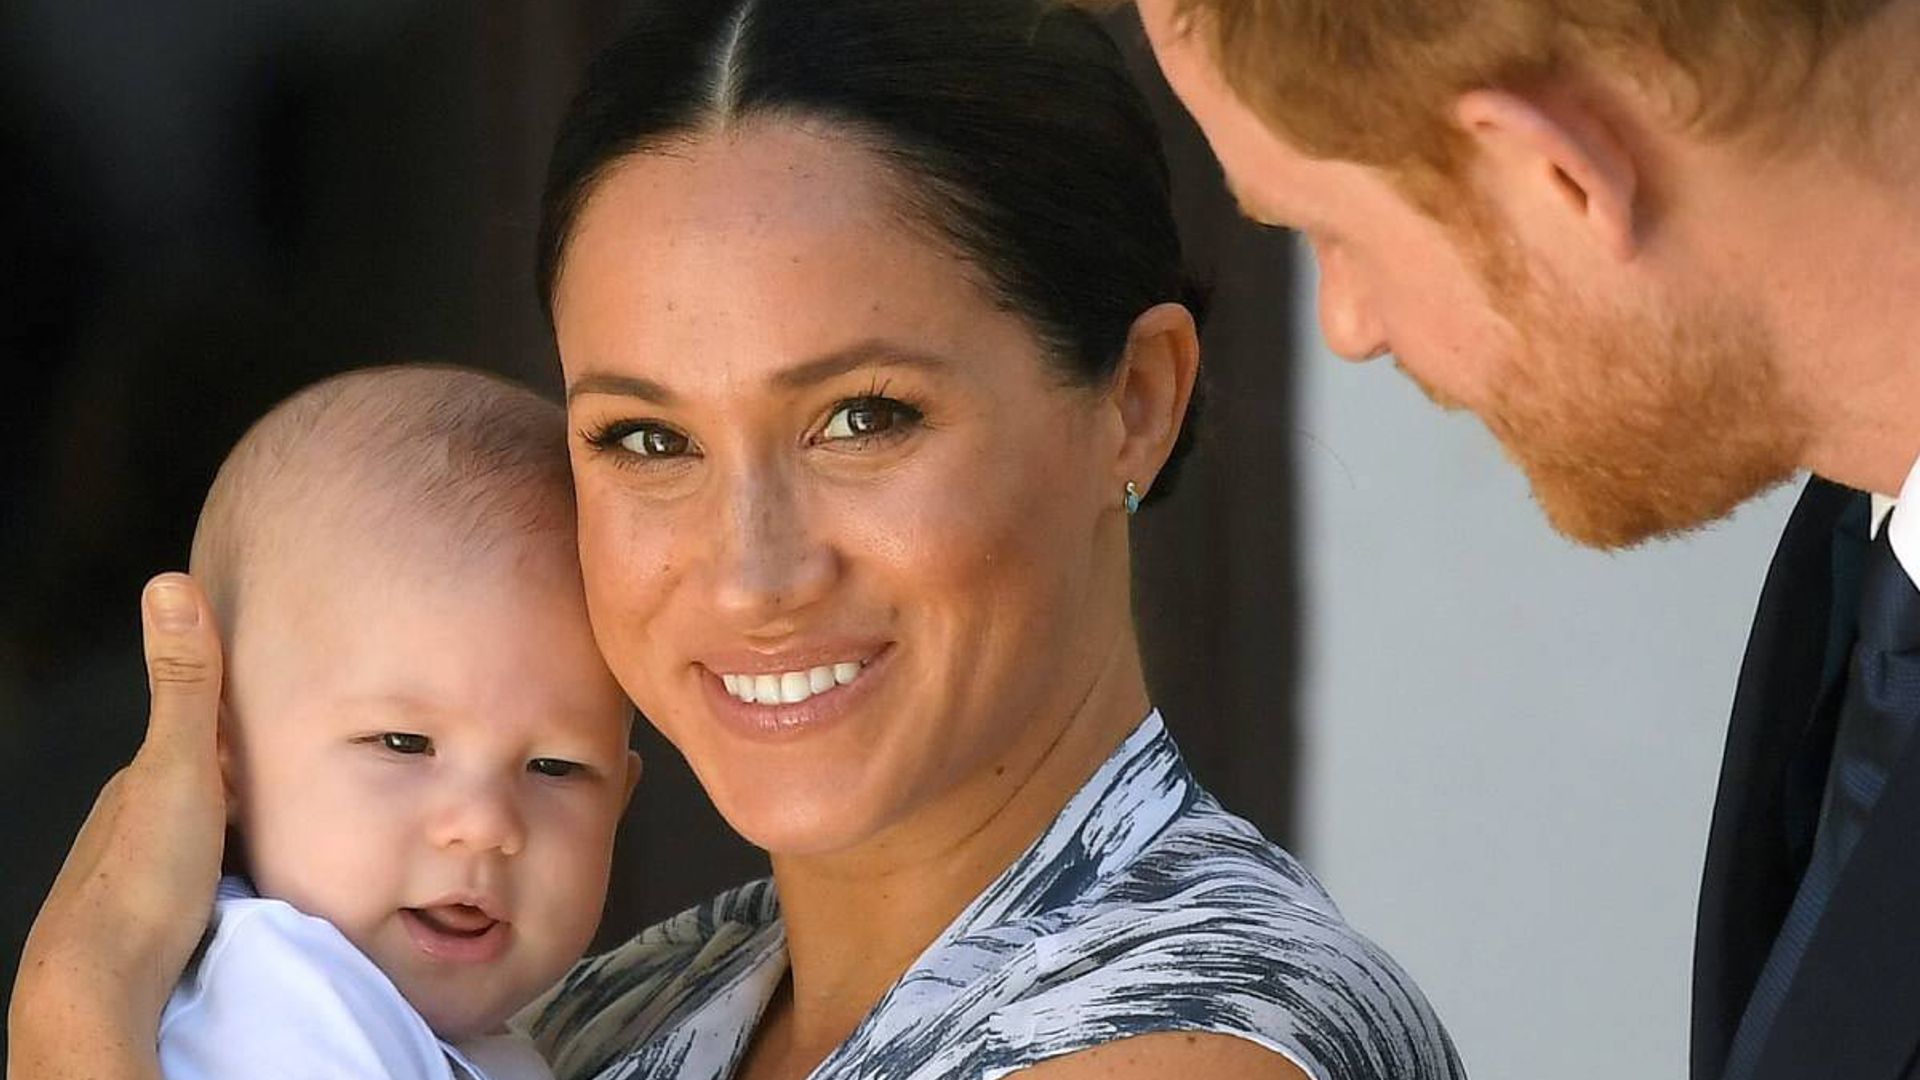 What Archie Harrison's first word says about Prince Harry and Meghan Markle's parenting